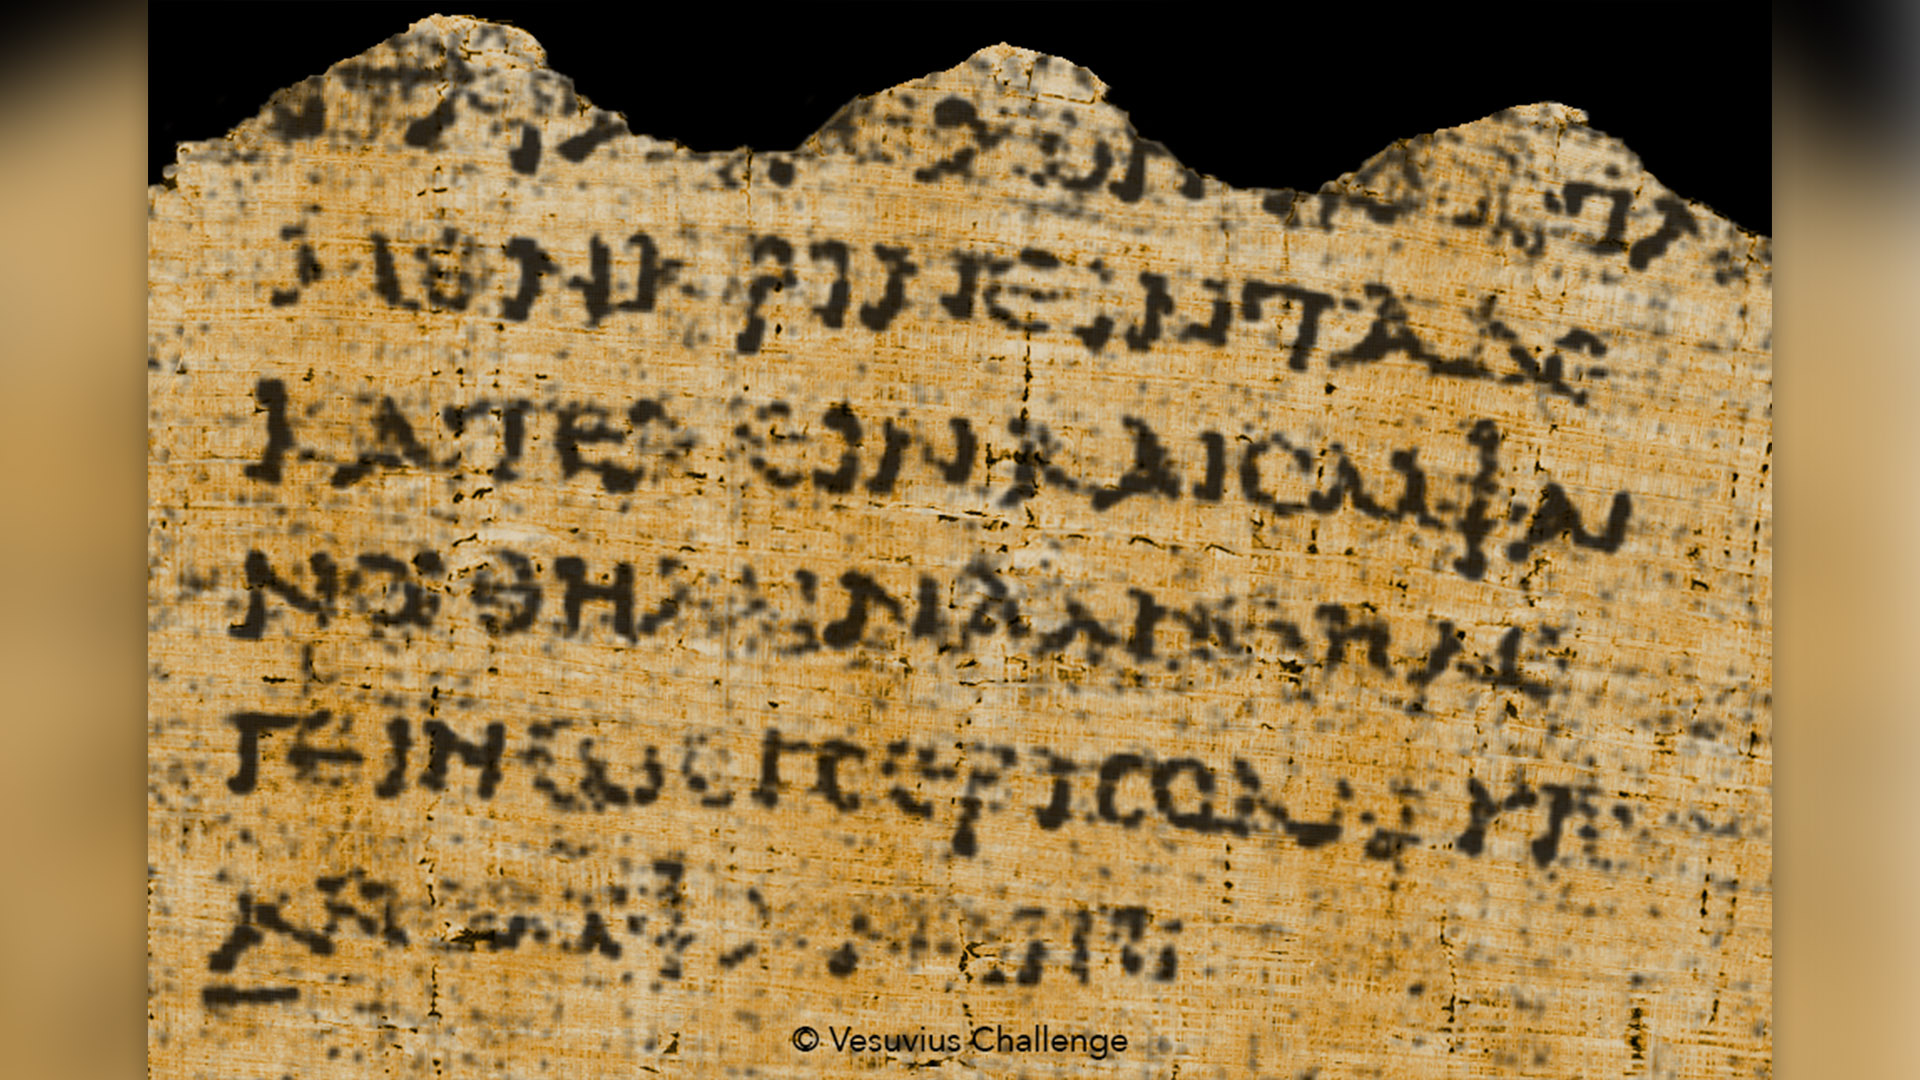 A physically unrolled scroll with golden background and black text.